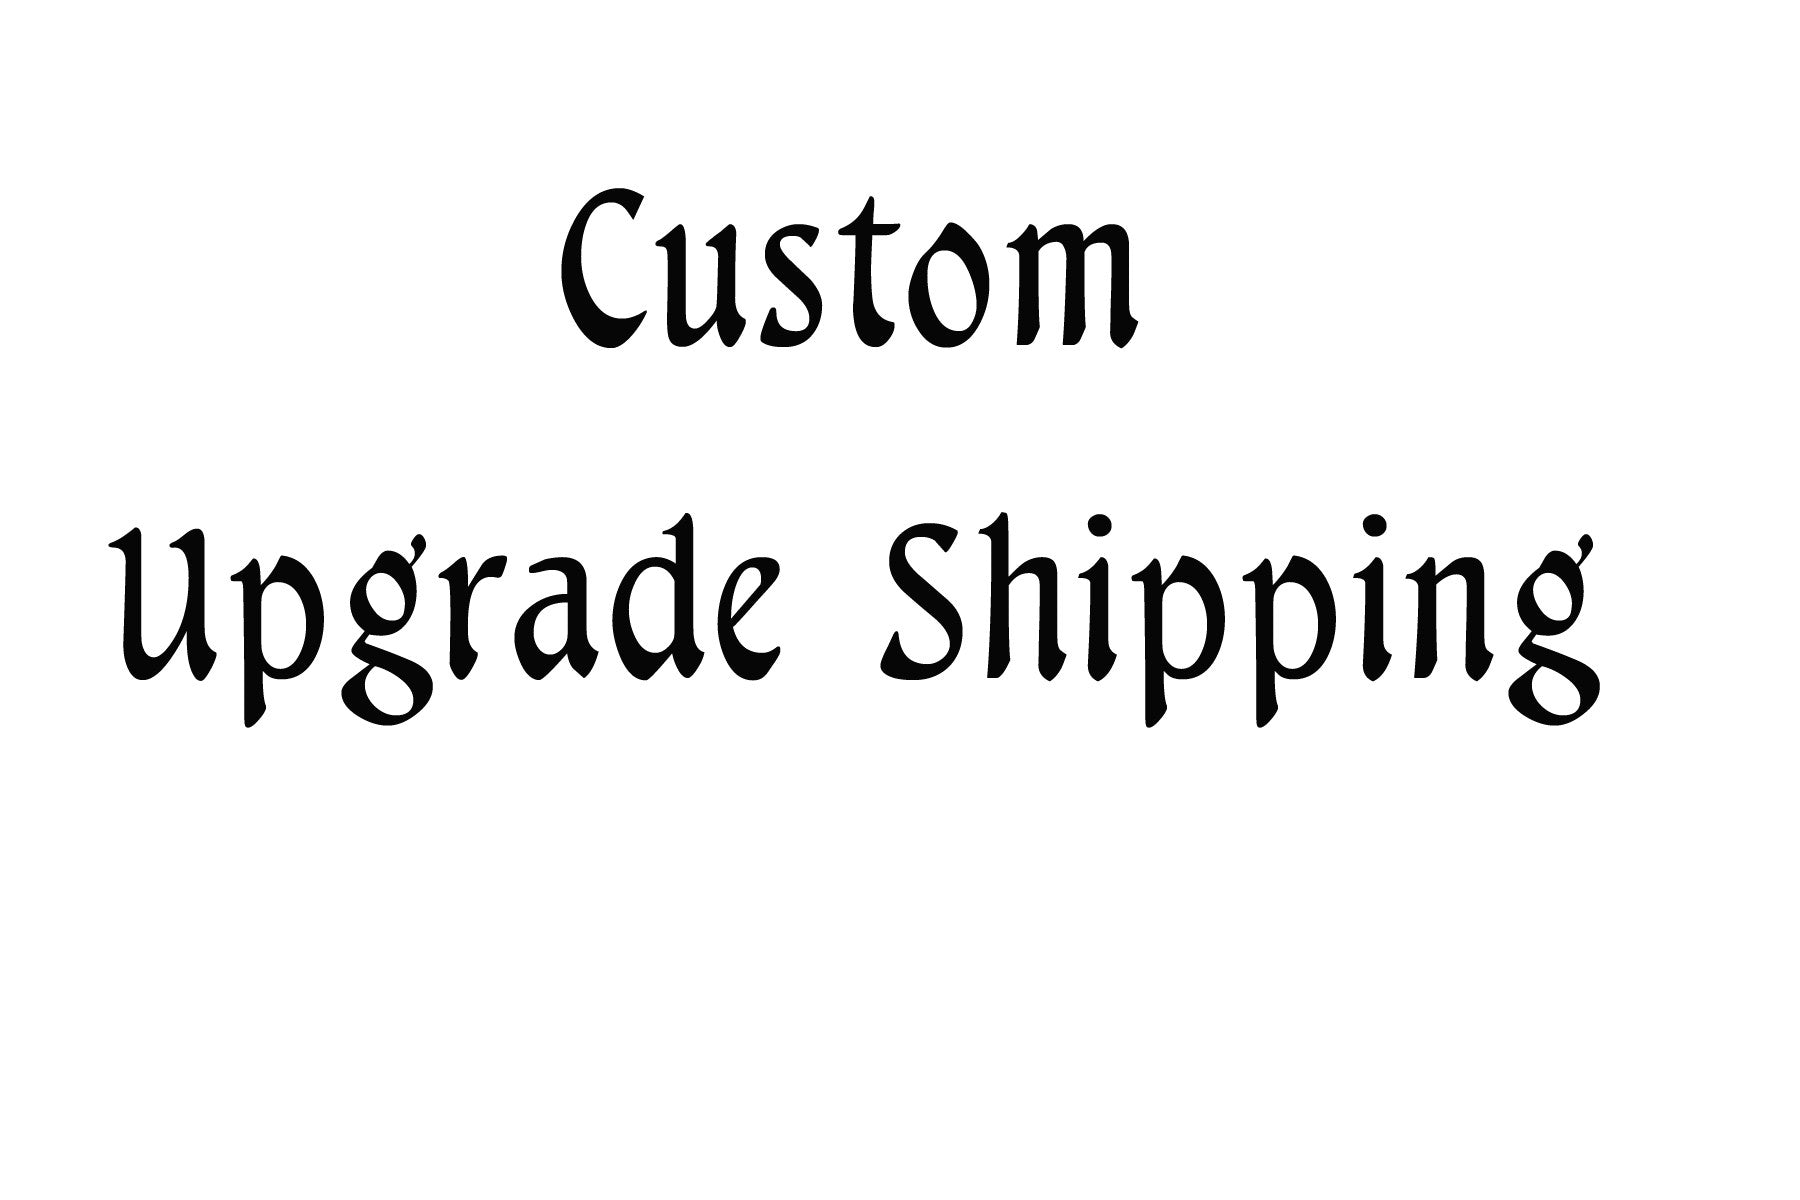 Overnight Upgrade to shipping - Vinyl Boutique Shop